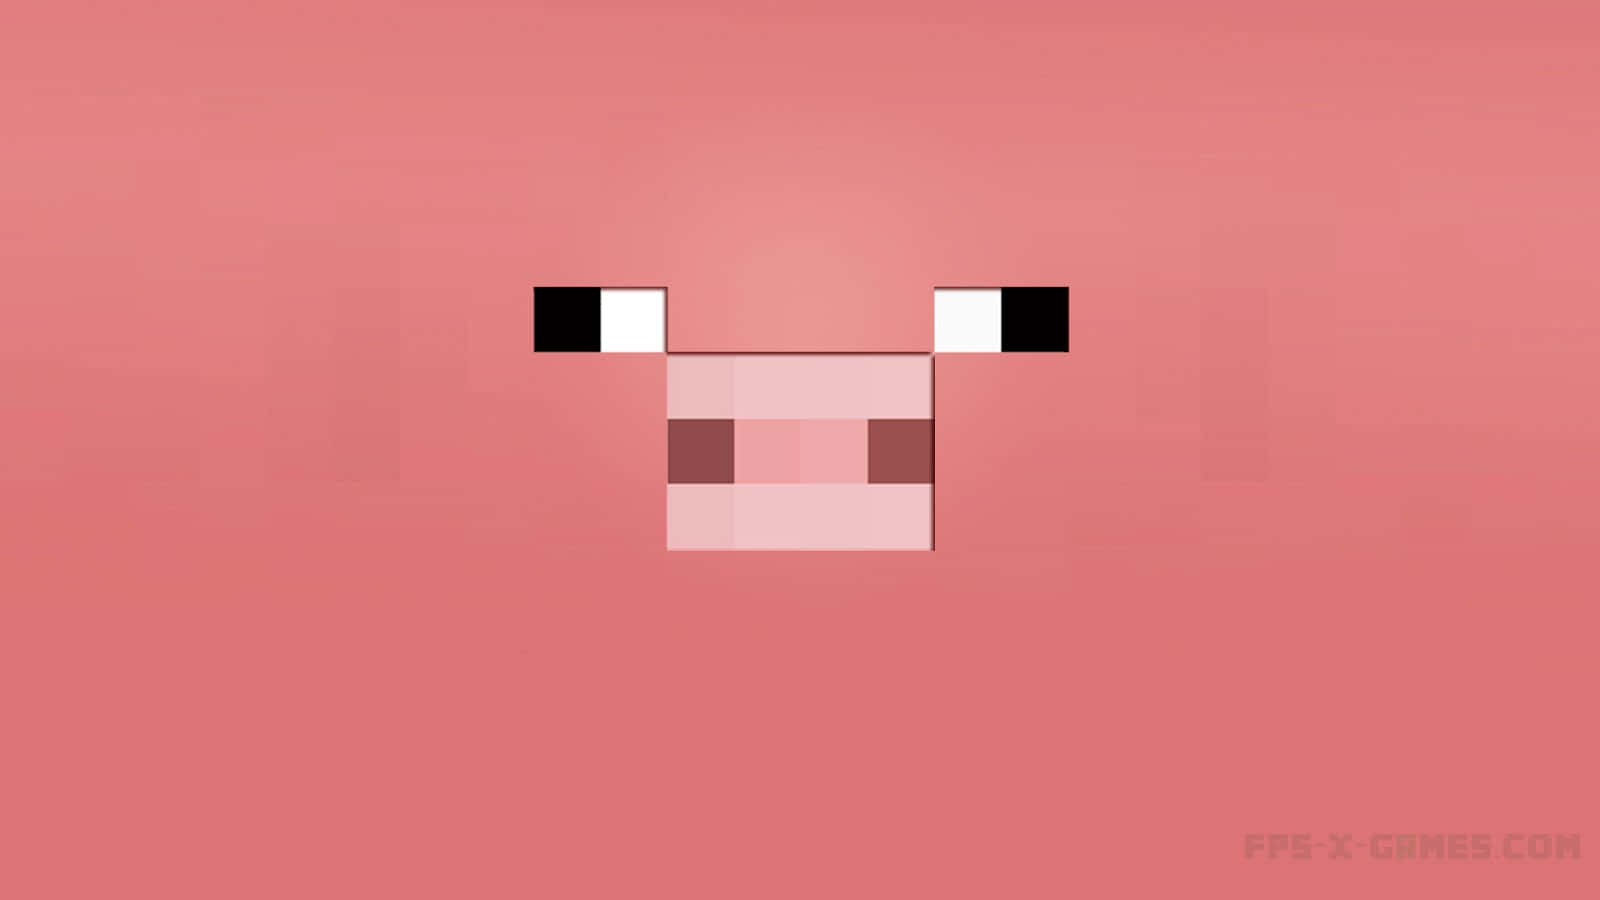 A Minecraft Pig, found in the game world Wallpaper